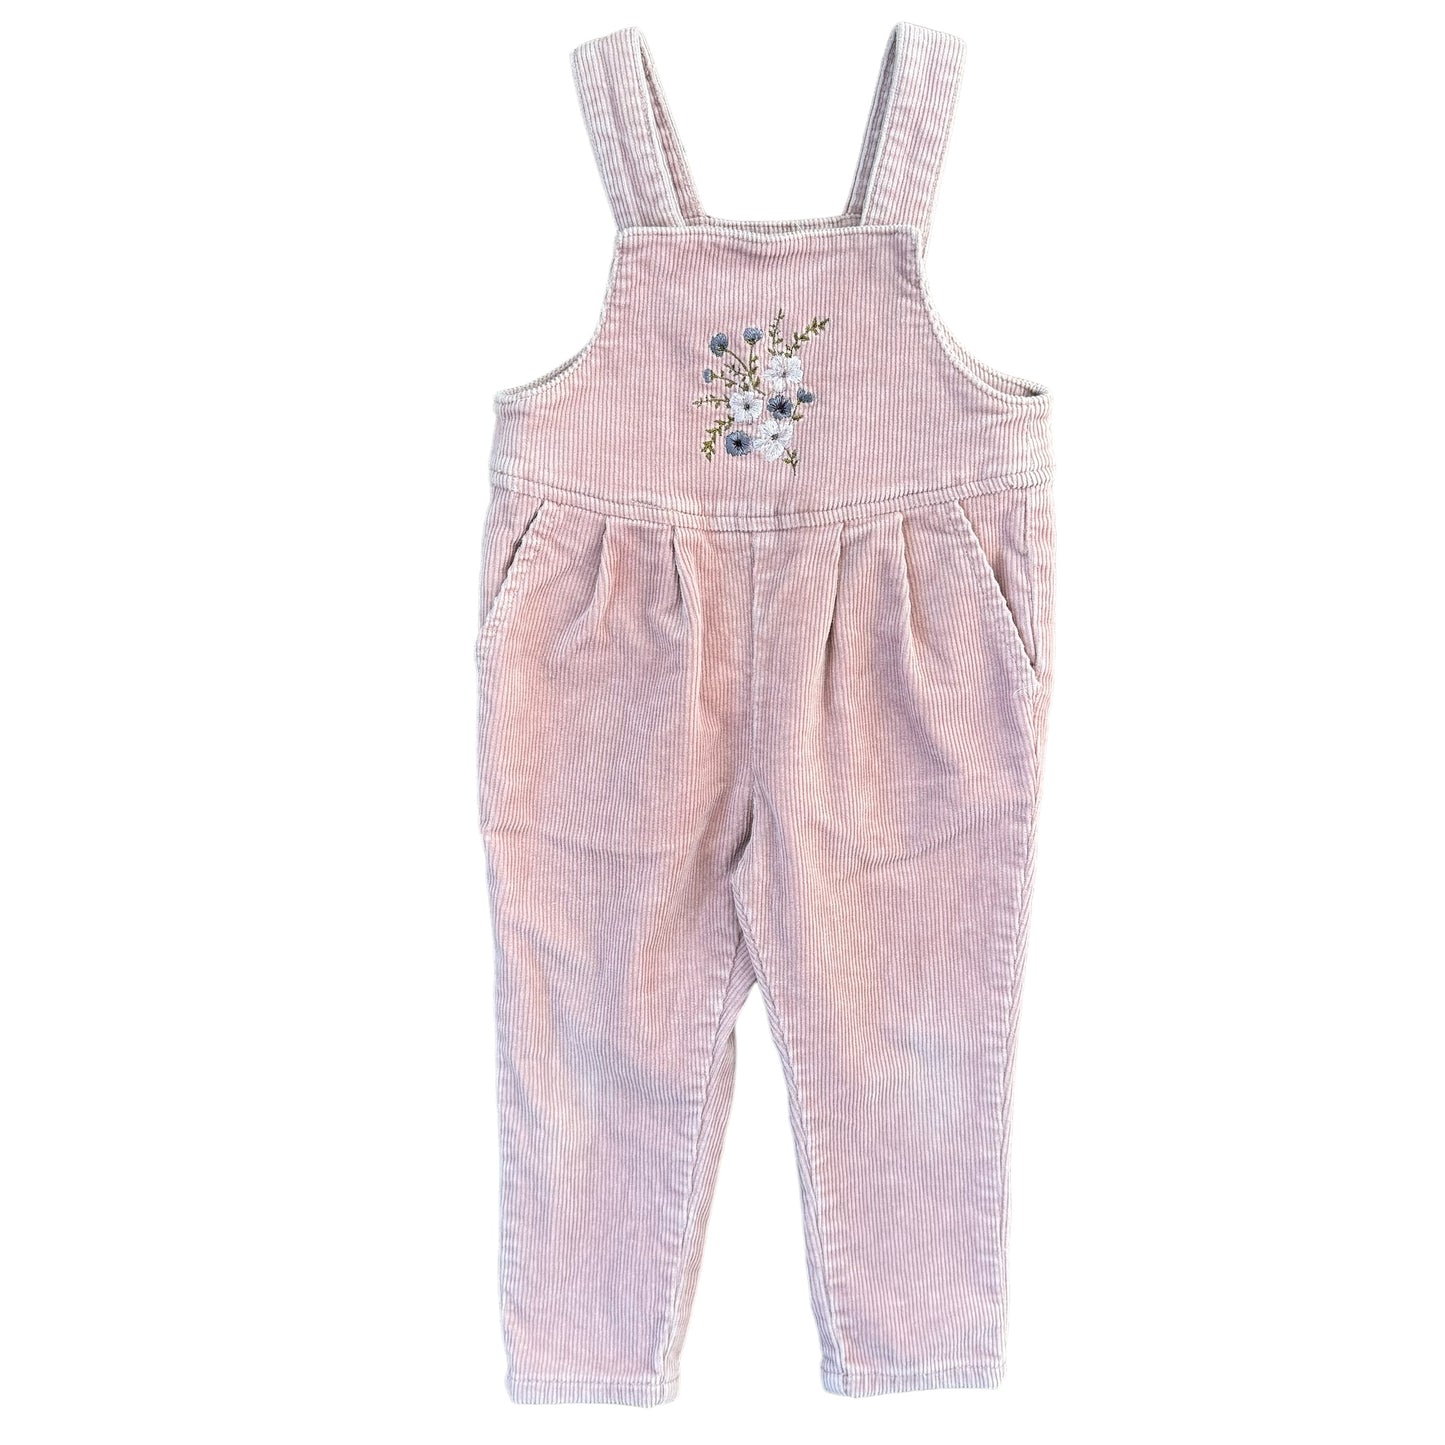 Jamie Kay overalls | Size: 1 year | BNWOT